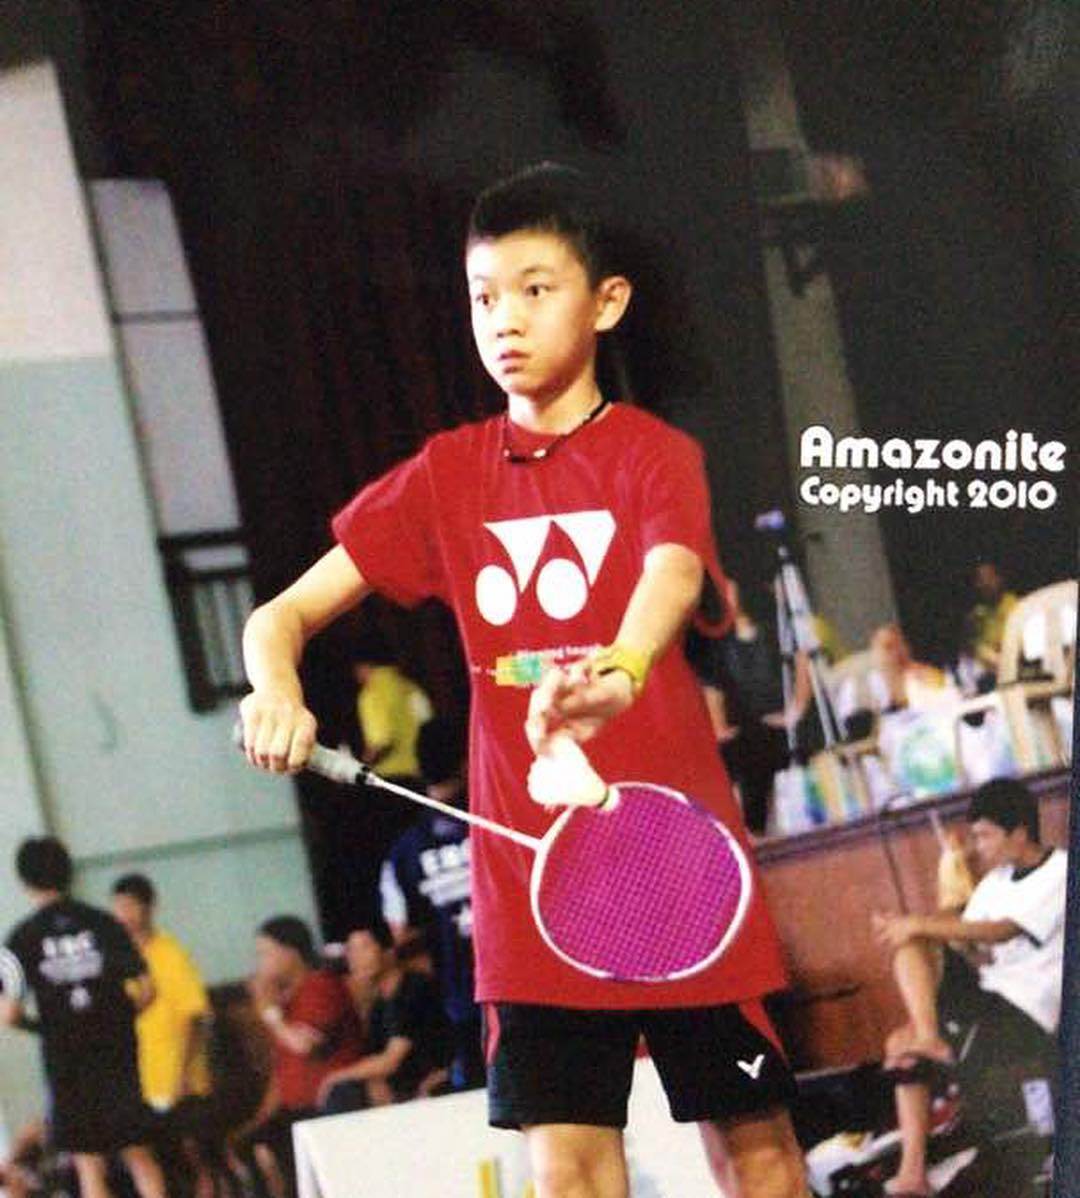 Lee Zii Jia 10 Facts About The 22-Year-Old Msian Badminton Player Who Won The All England Open